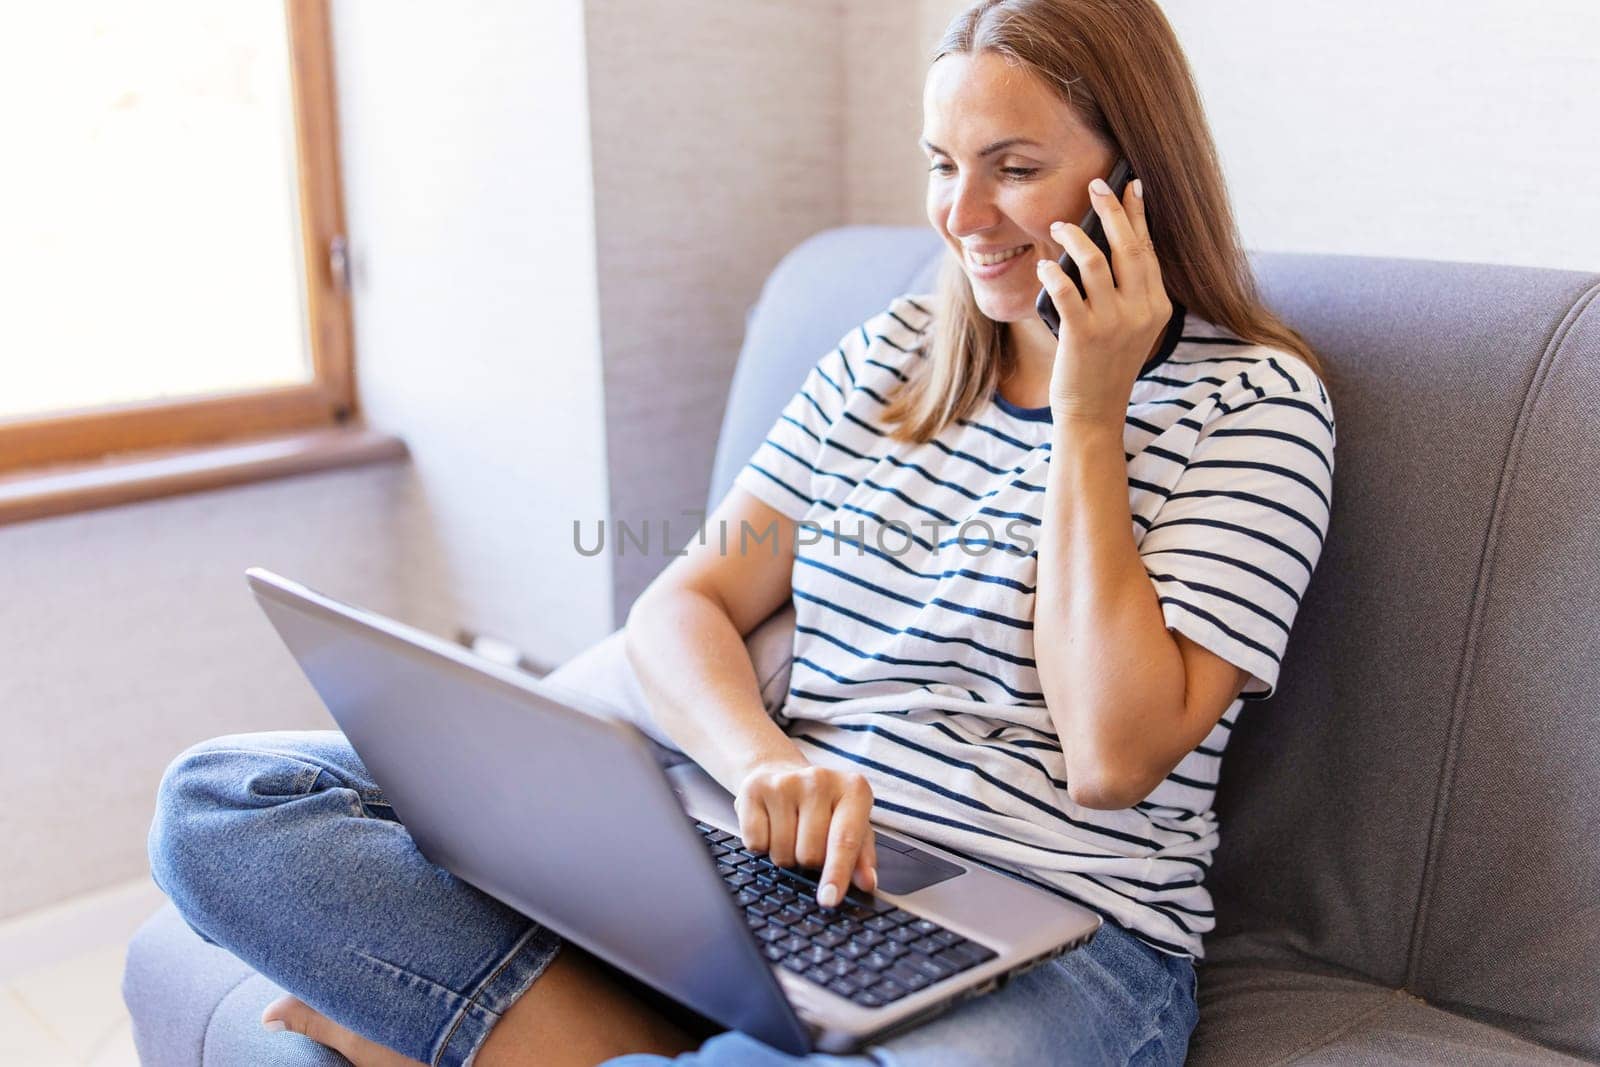 Happy young woman using mobile phone while sitting on sofa at home with laptop. A woman is talking on a cell phone, asks questions, looks at the computer screen.